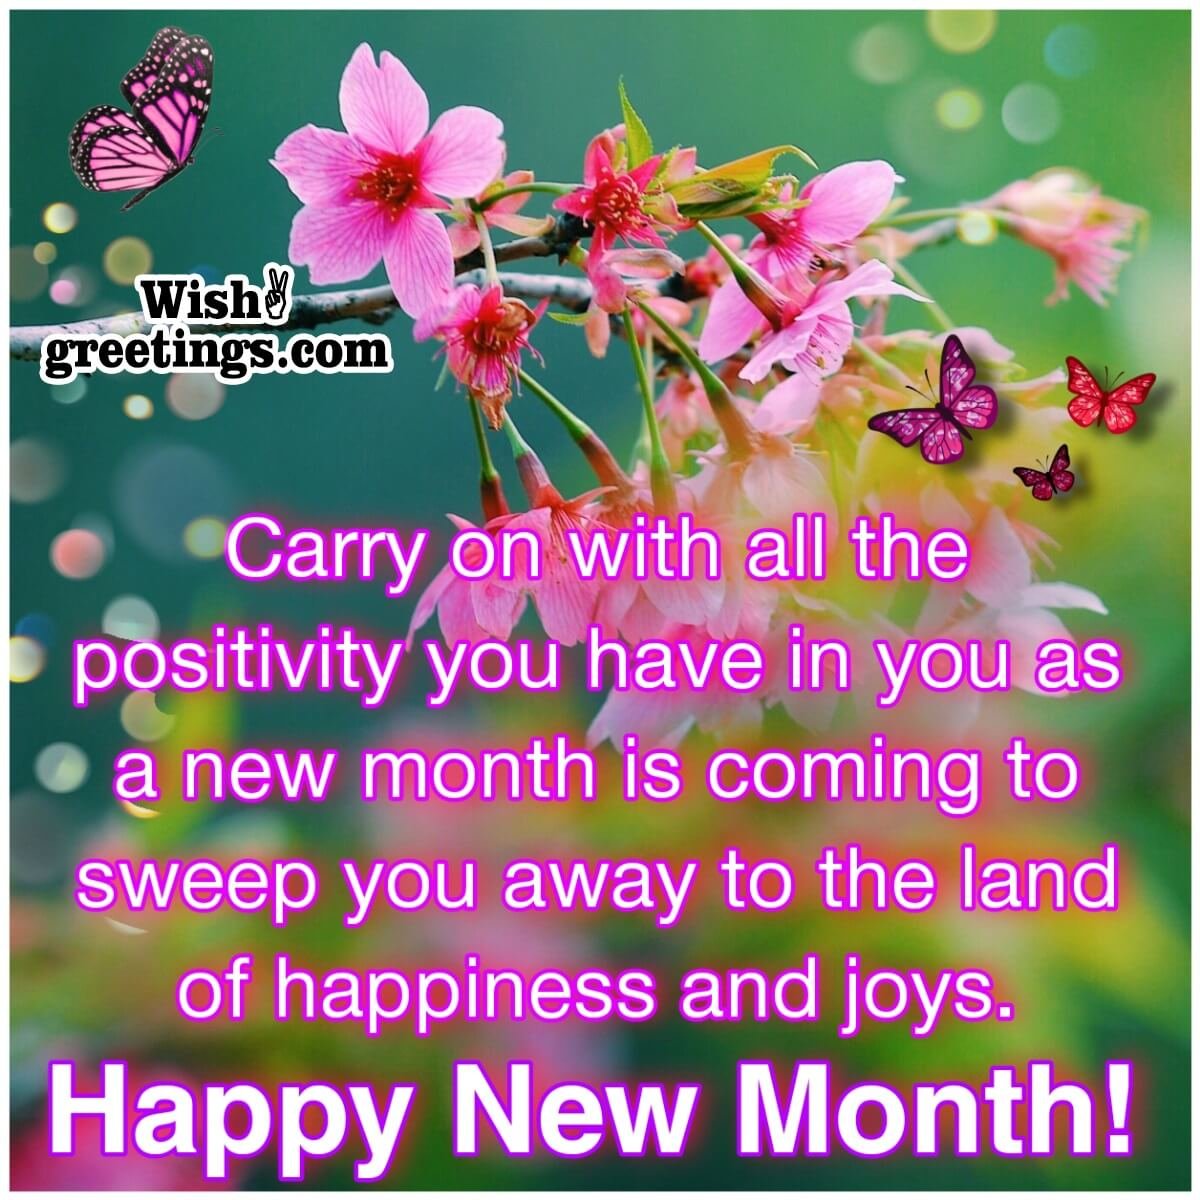 Happy New Month Messages Wish Greetings